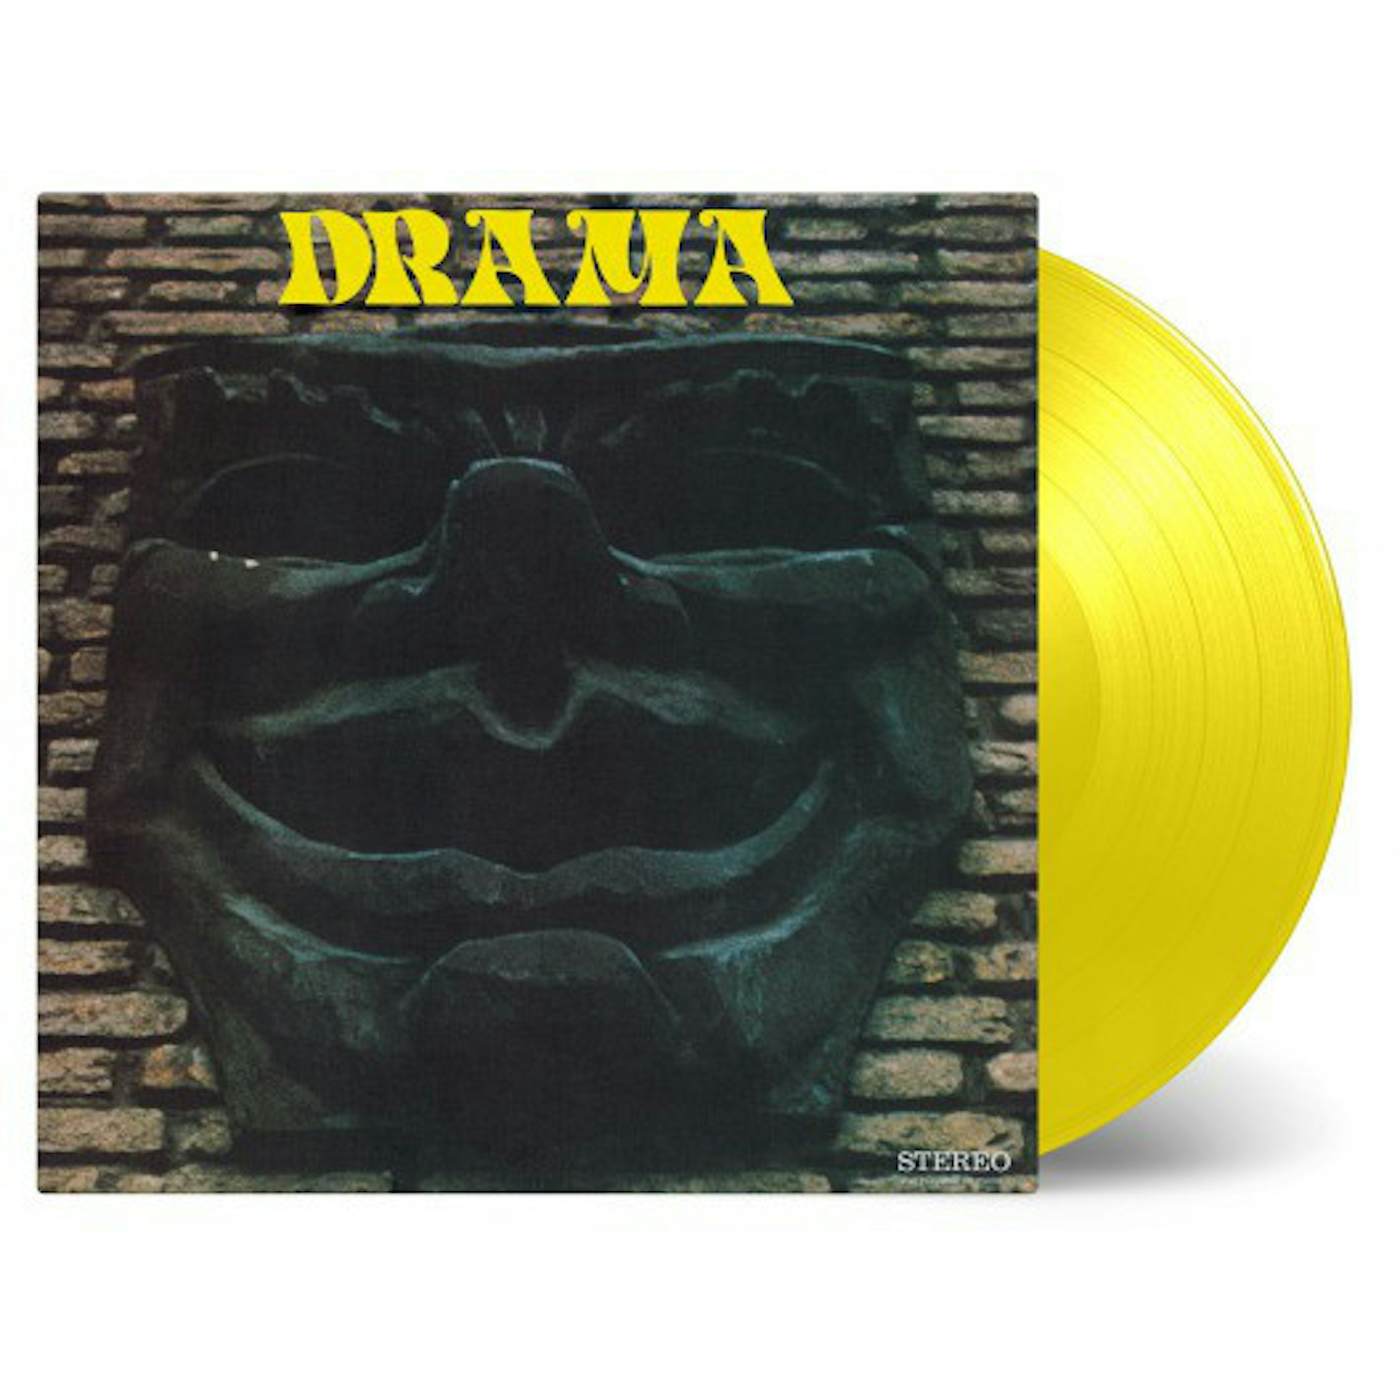 DRAMA (LIMITED YELLOW 180G AUDIOPHILE VINYL/NUMBERED/IMPORT) Vinyl Record